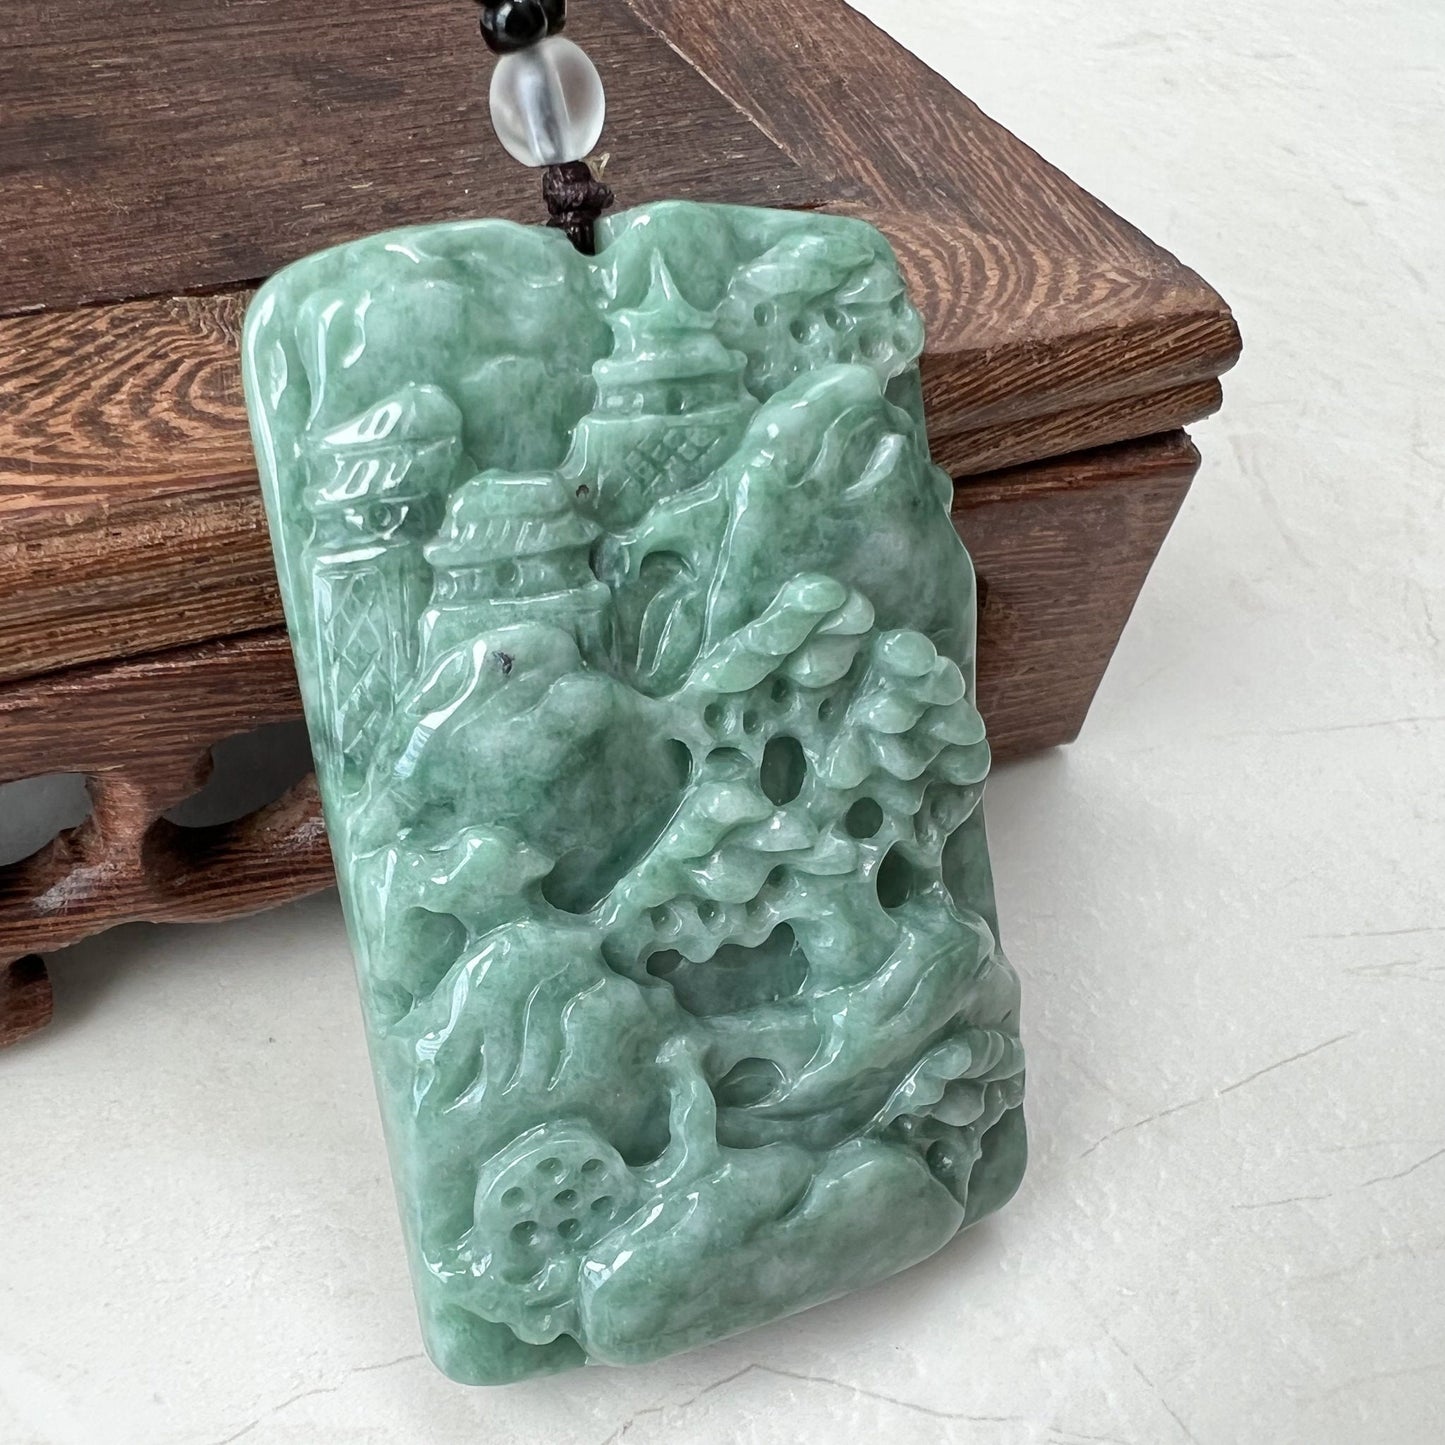 Large Tree Jade Pendant, Mountain Forest River Scenery, Hand Carved Pendant Necklace, YJ-0921-0179910 - AriaDesignCollection